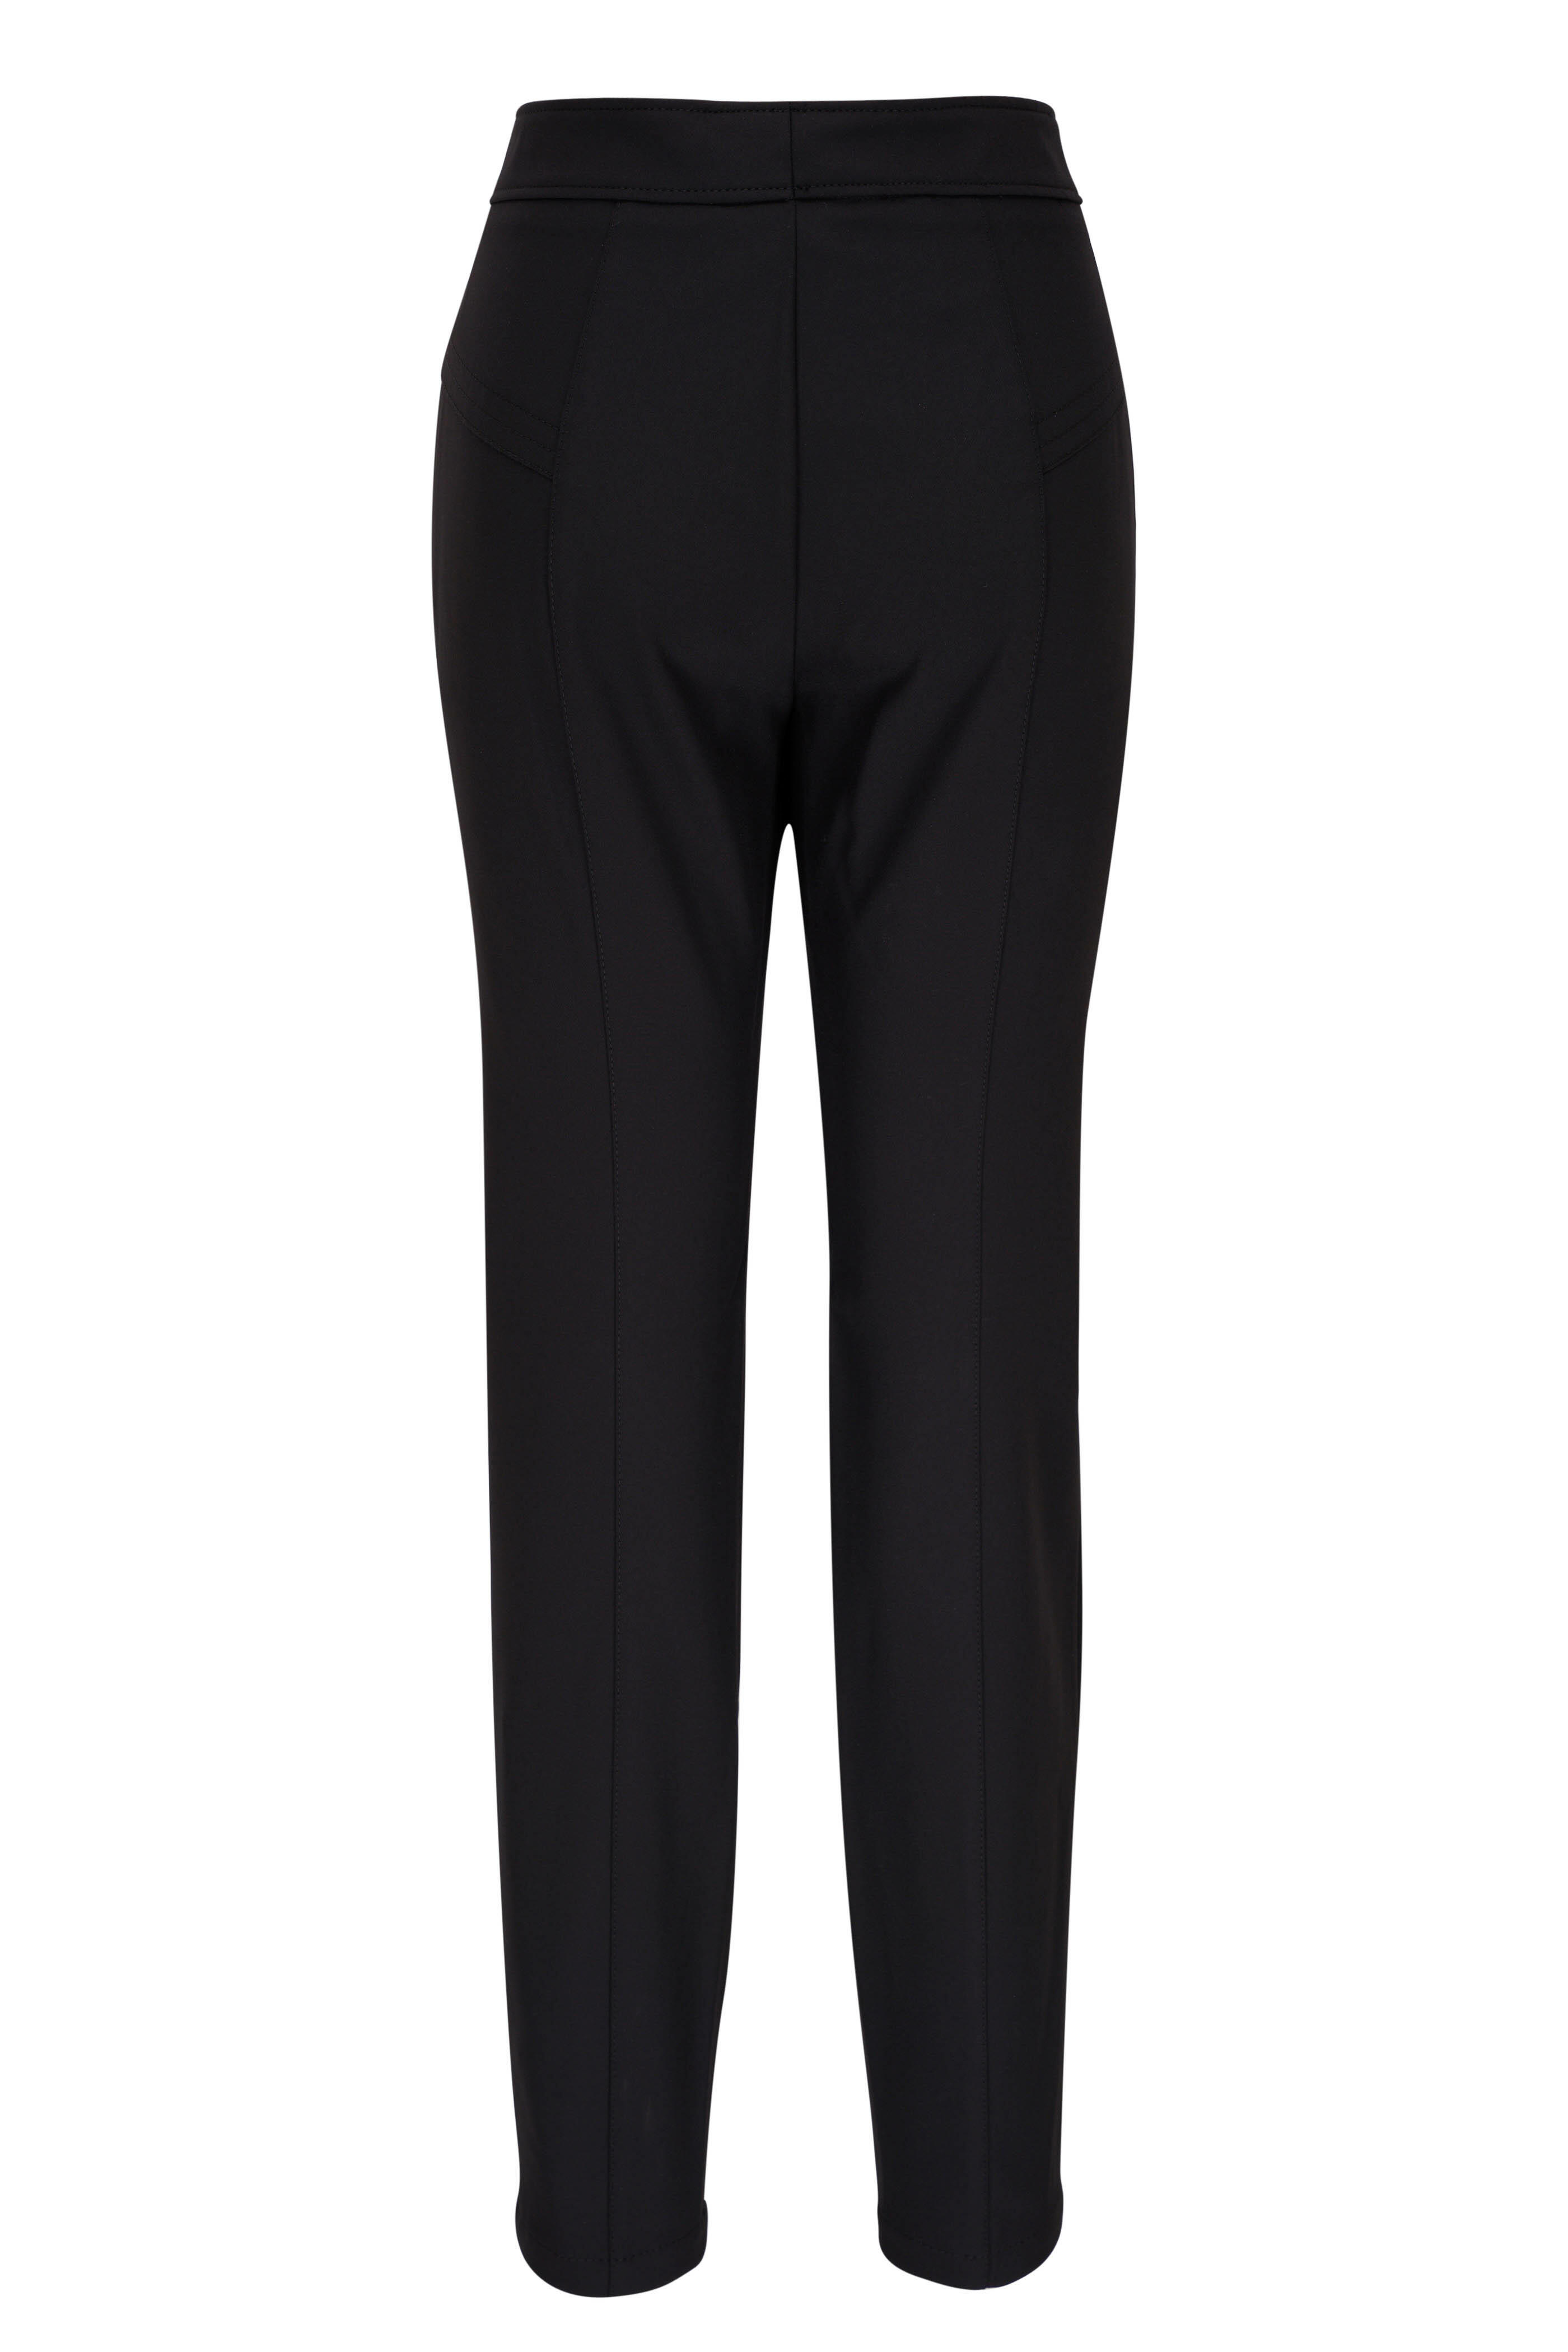 Bogner - Lindy Black Stretch Pant | Mitchell Stores